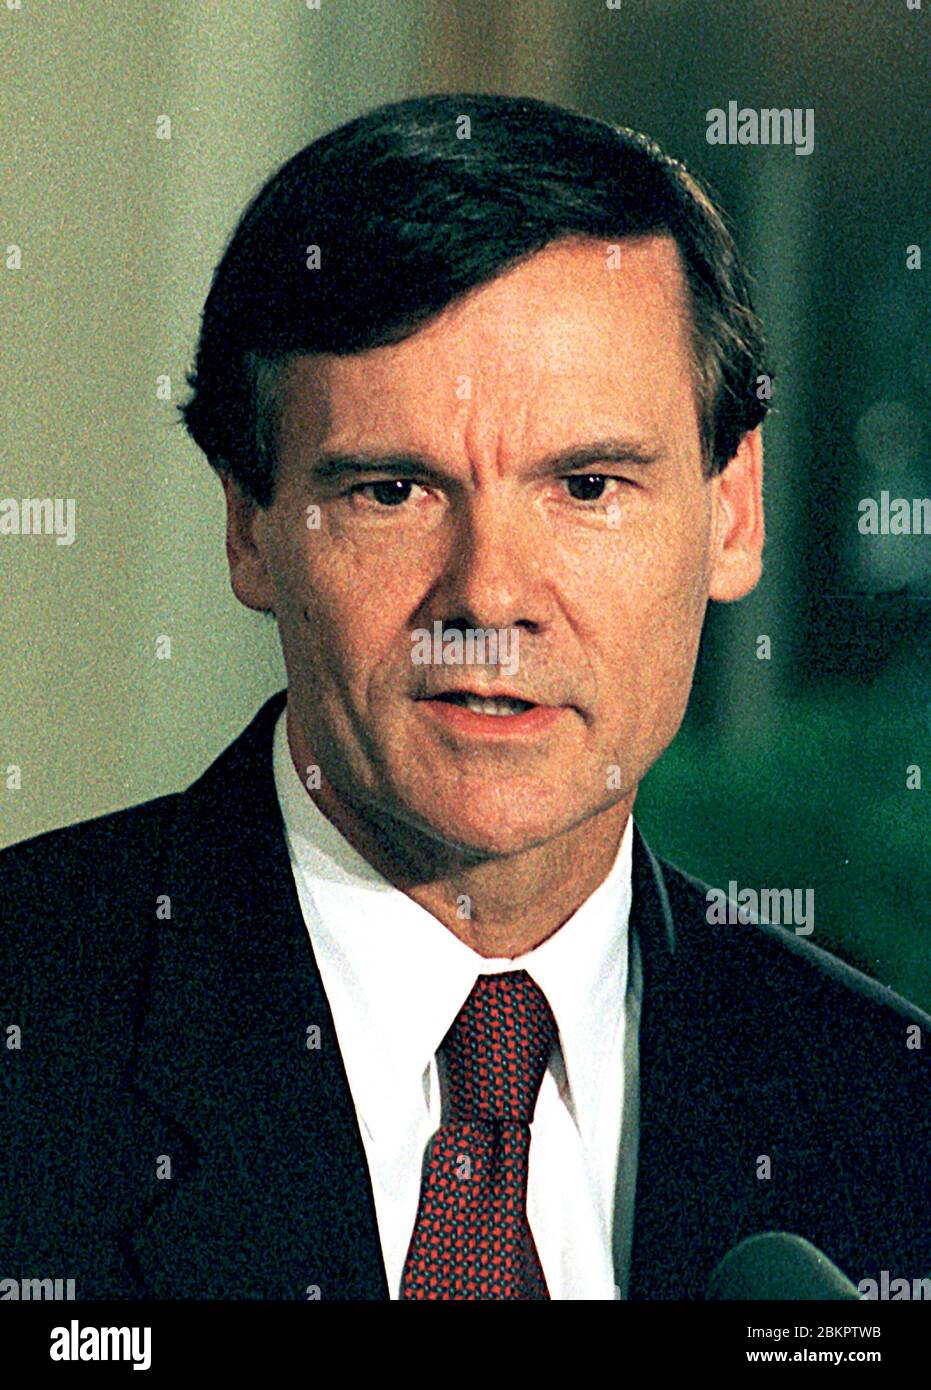 bryder daggry vene flov United States Senator Tim Hutchinson (Republican of Arkansas) speaks during  the White House ceremony presenting the Congressional Gold Medal to the  members of the "Little Rock Nine" on 9 November, 1999 in